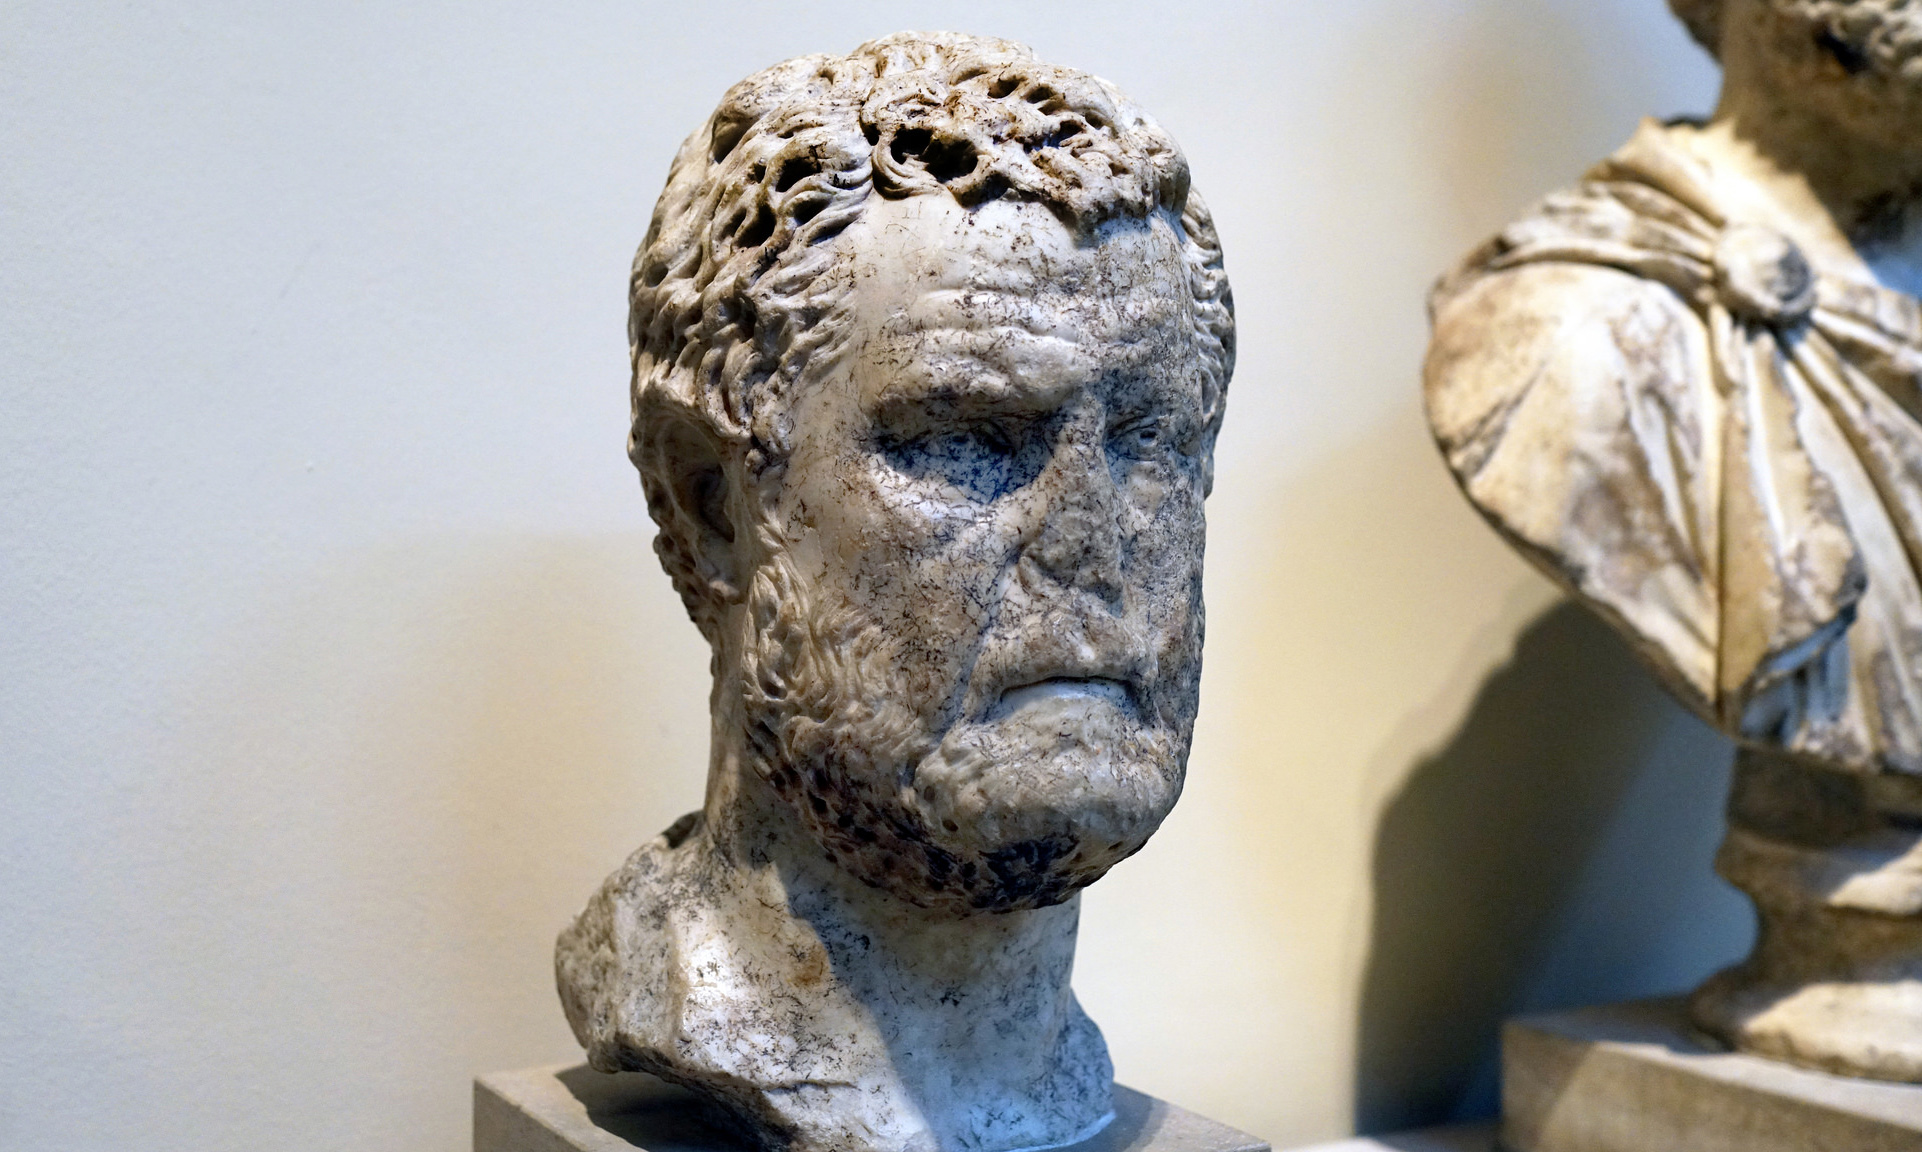 Two marble portrait busts, 2nd century C.E., found during an excavation in 1949, Lullingstone Roman Villa, Kent (British Museum, on loan from Kent County Council).